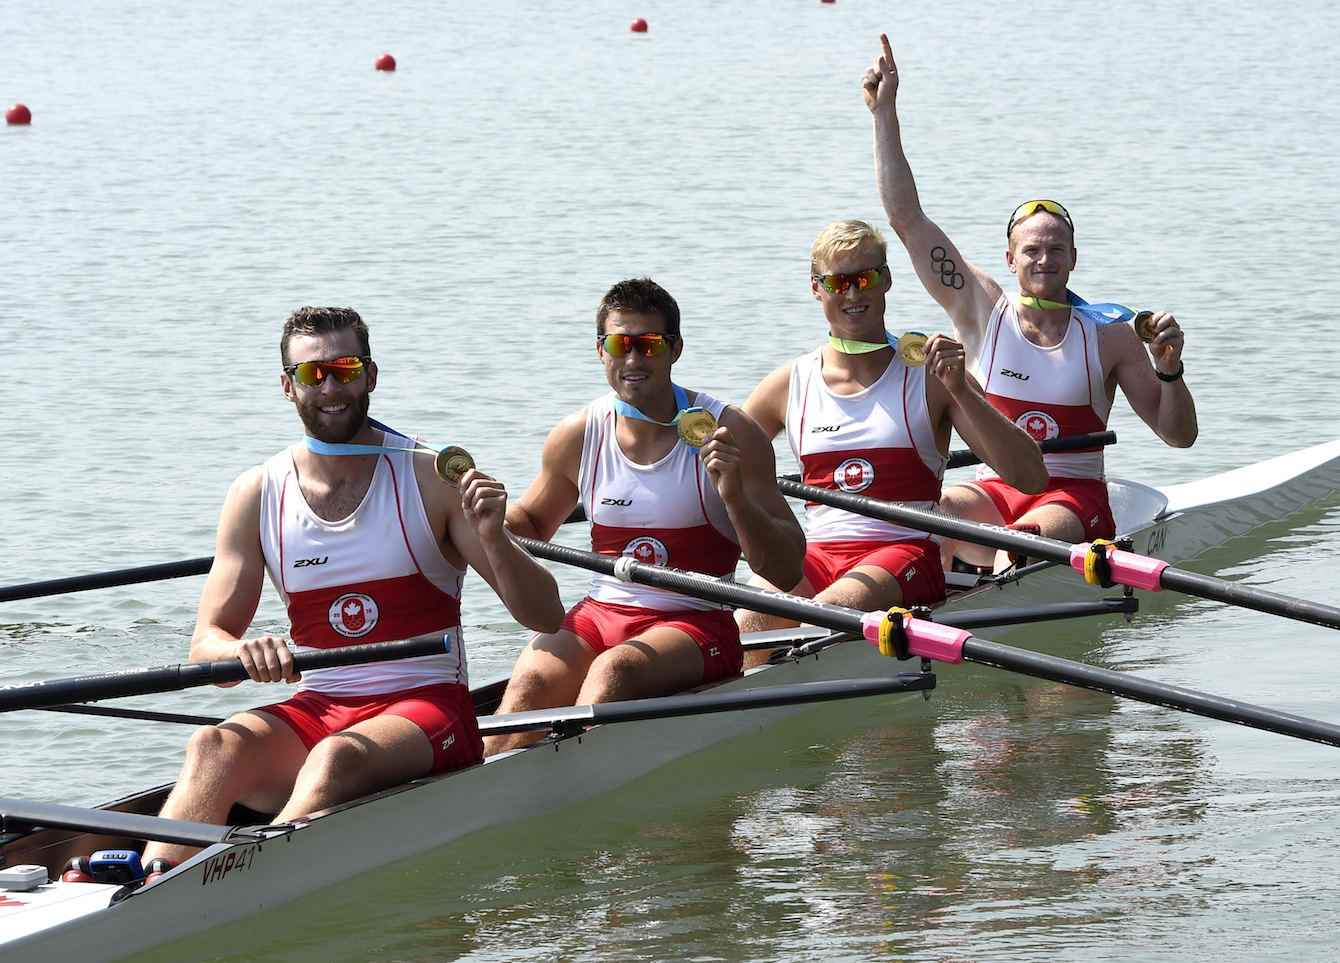 The men’s coxless four crew (Will Crothers, Kai Langerfeld, Conlin McCabe and Tim Schrijver) rowed to gold